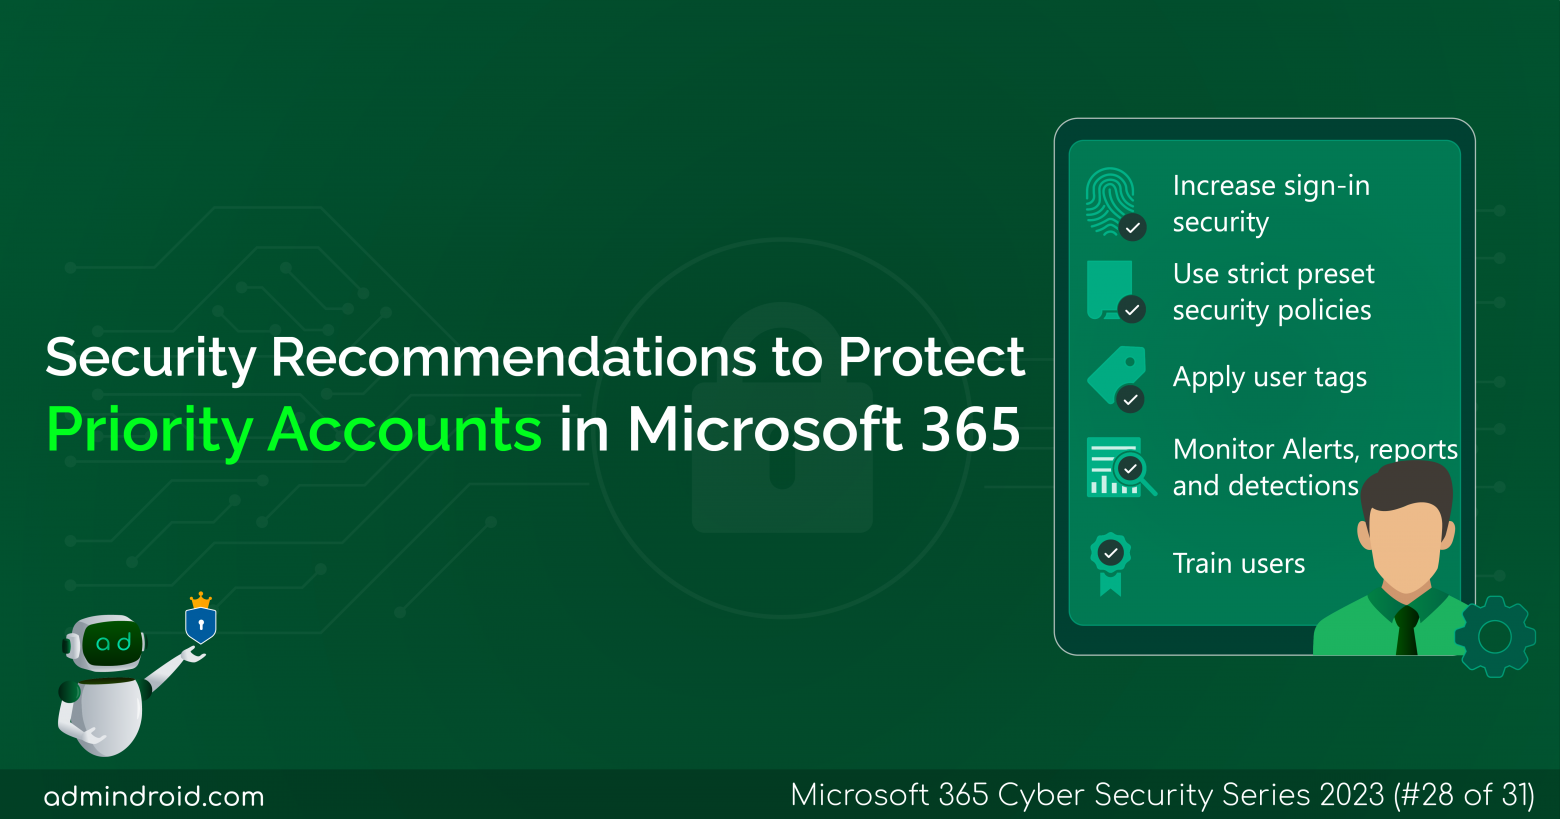 Best Practices for Protecting Priority Accounts in Microsoft 365